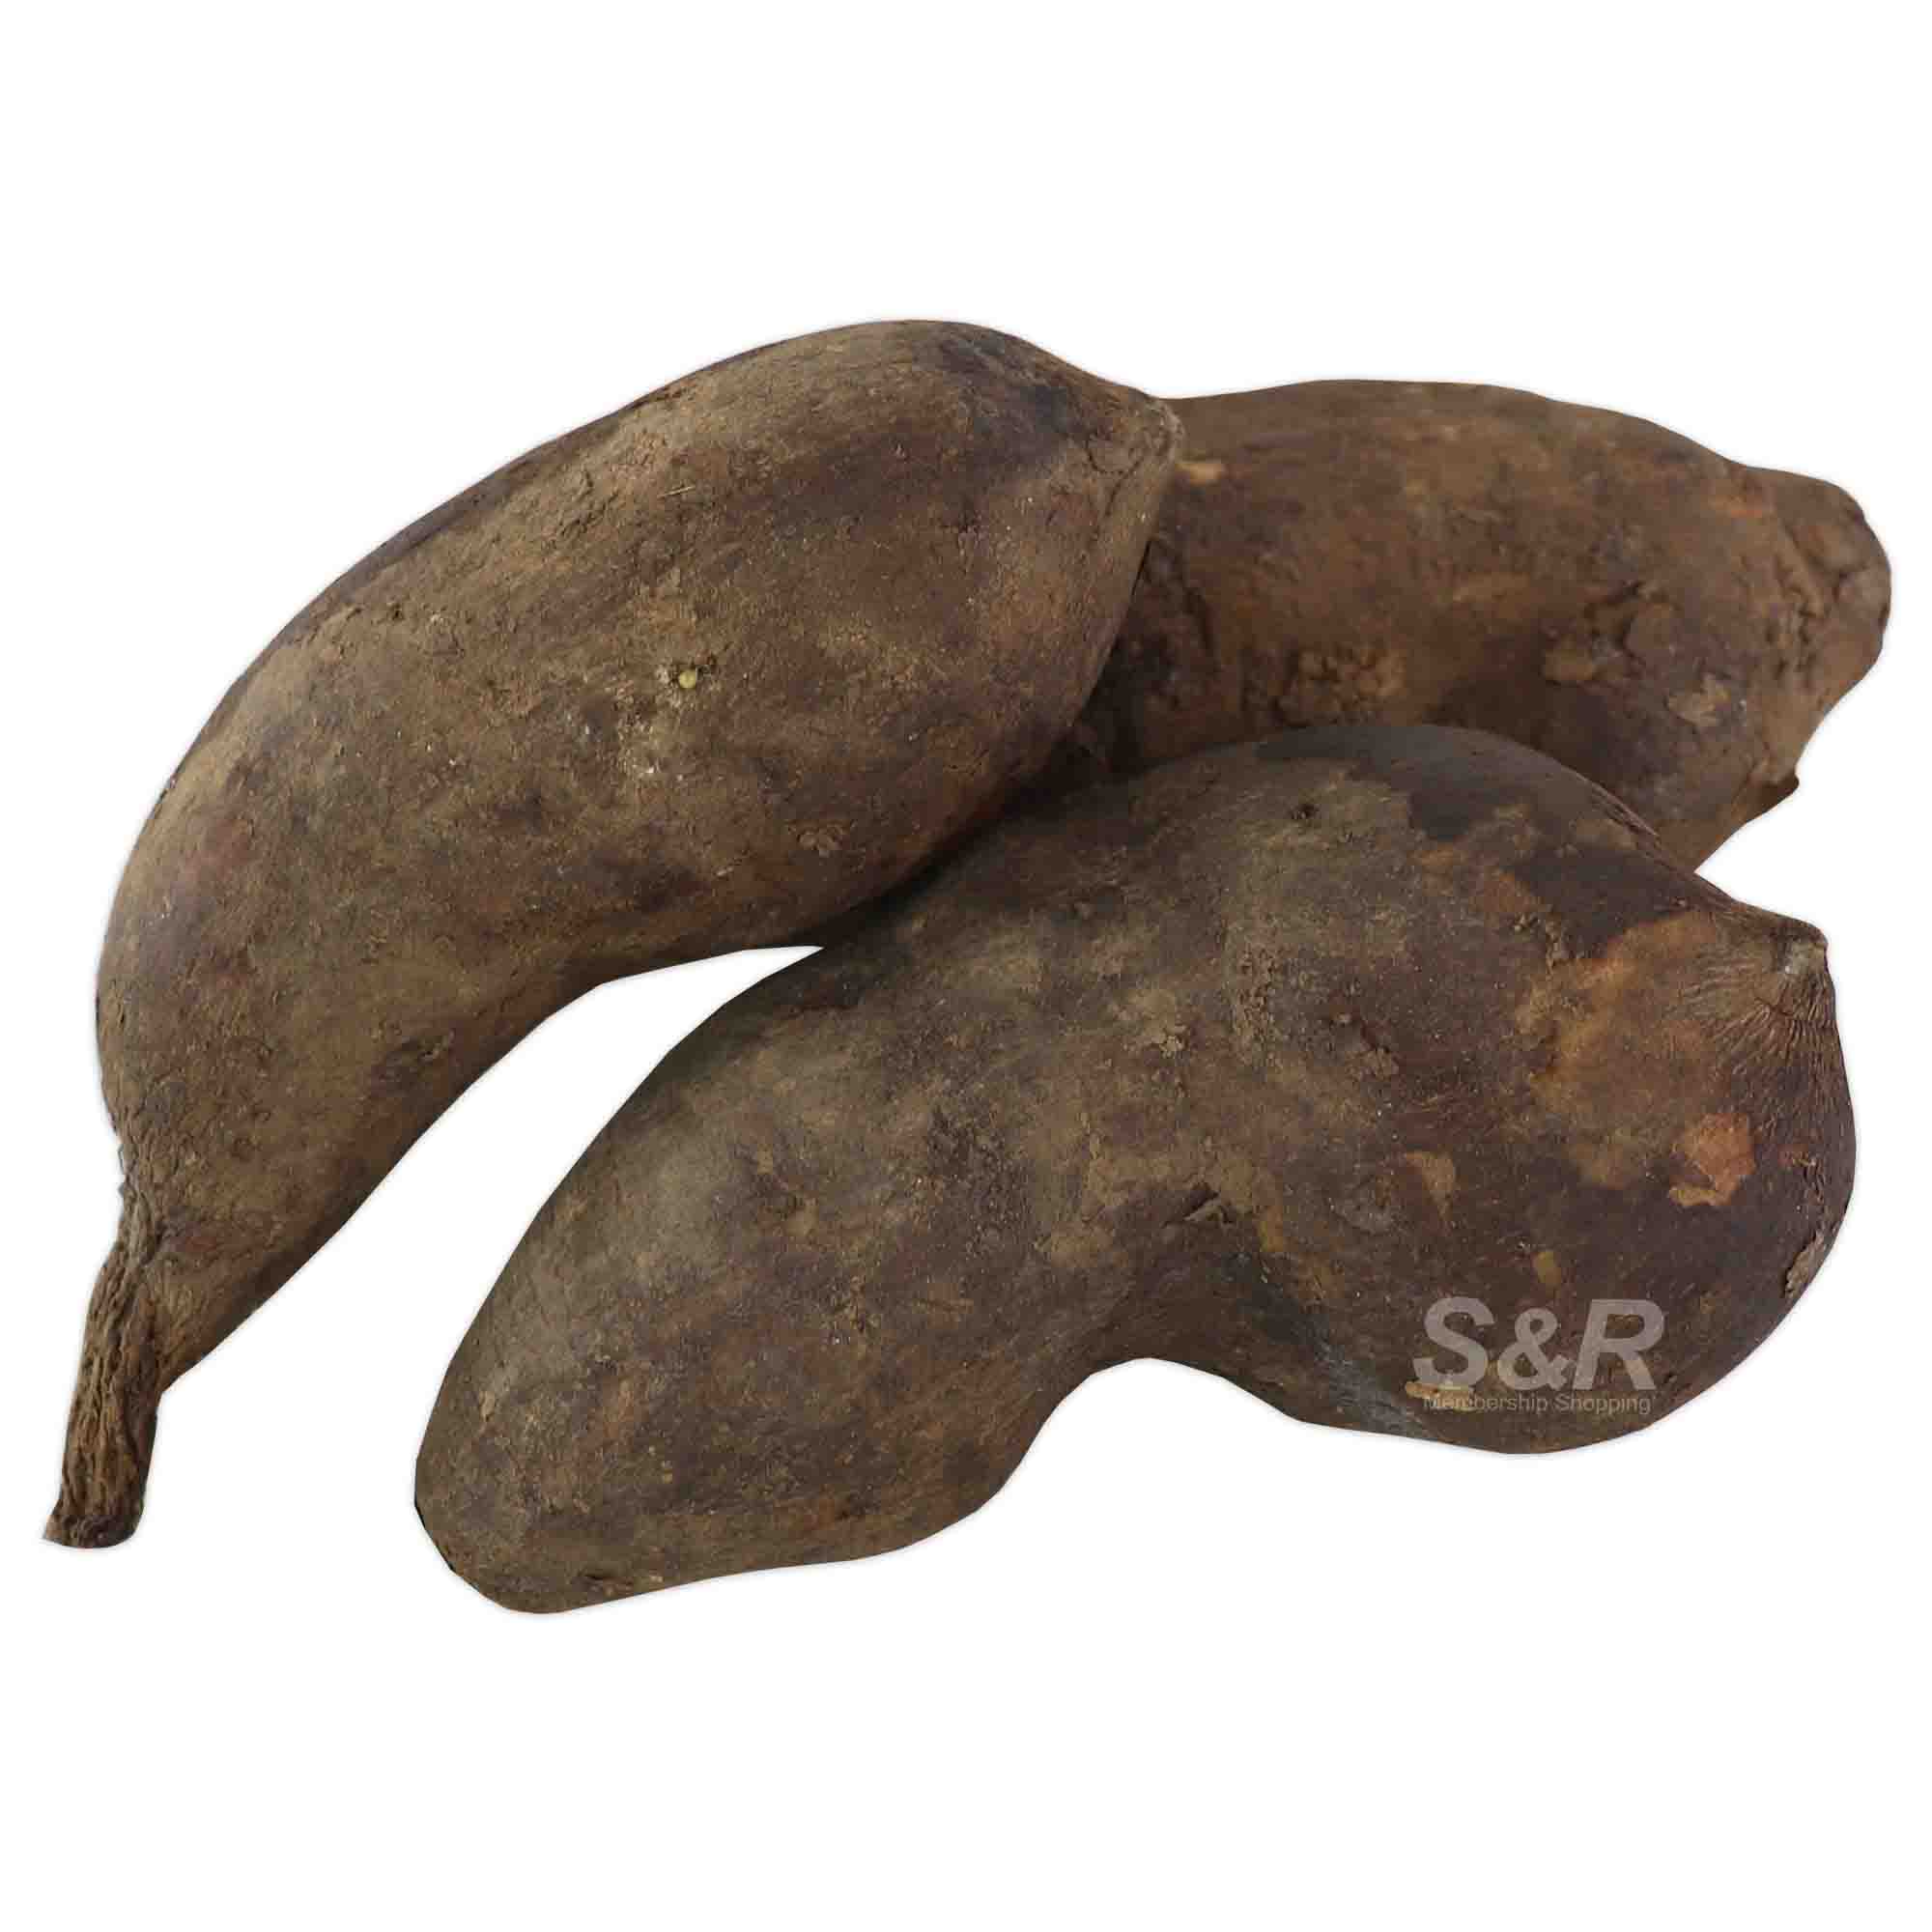 S&R Yacoon approx. 1kg